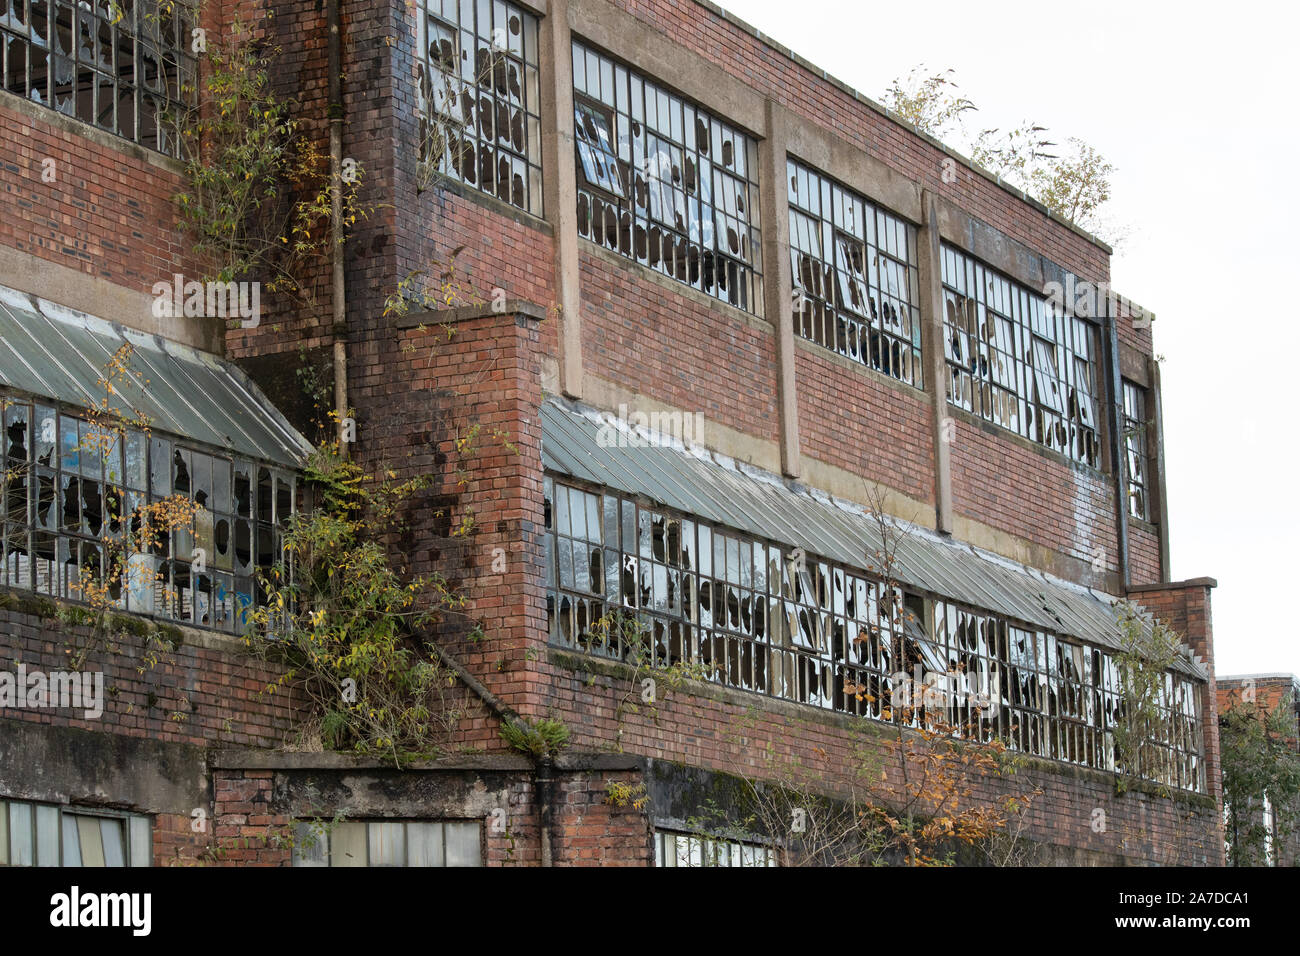 Atherstone hat factory, Coventry canal, Atherstone. The dilapidated building has stood empty and is now set to become housing for the elderly. Stock Photo